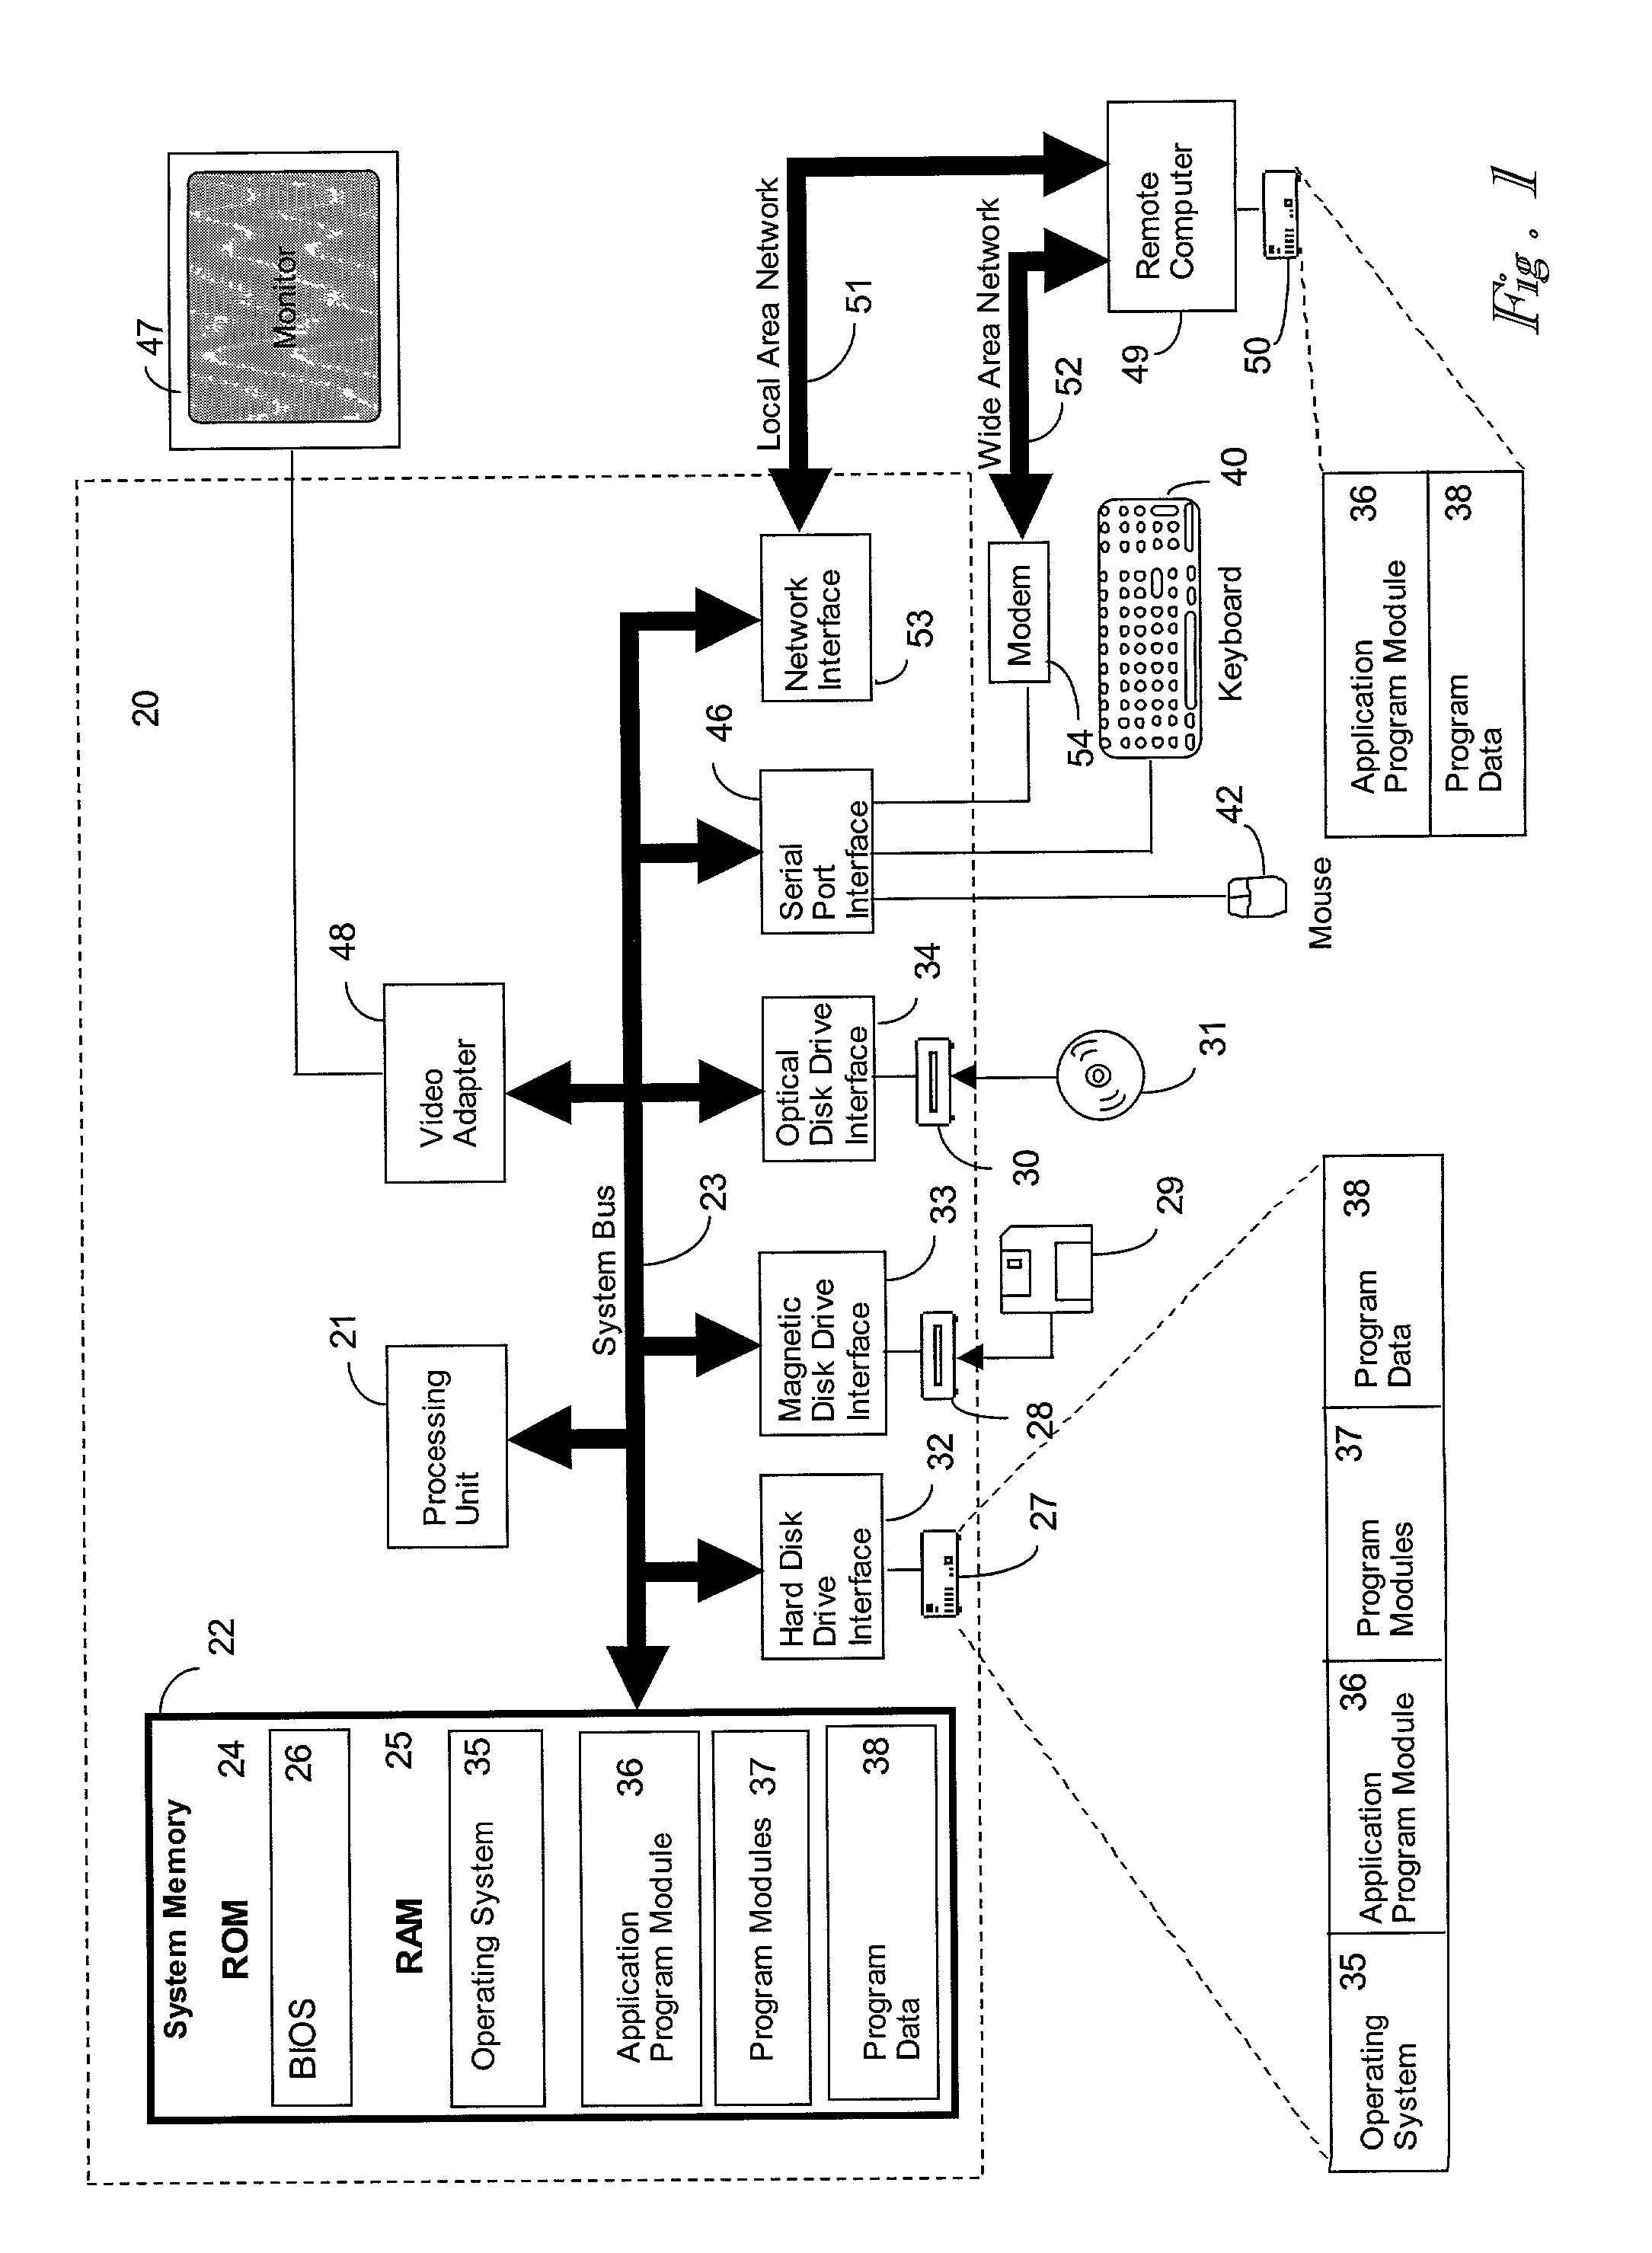 Application program interfaces for semantically labeling strings and providing actions based on semantically labeled strings